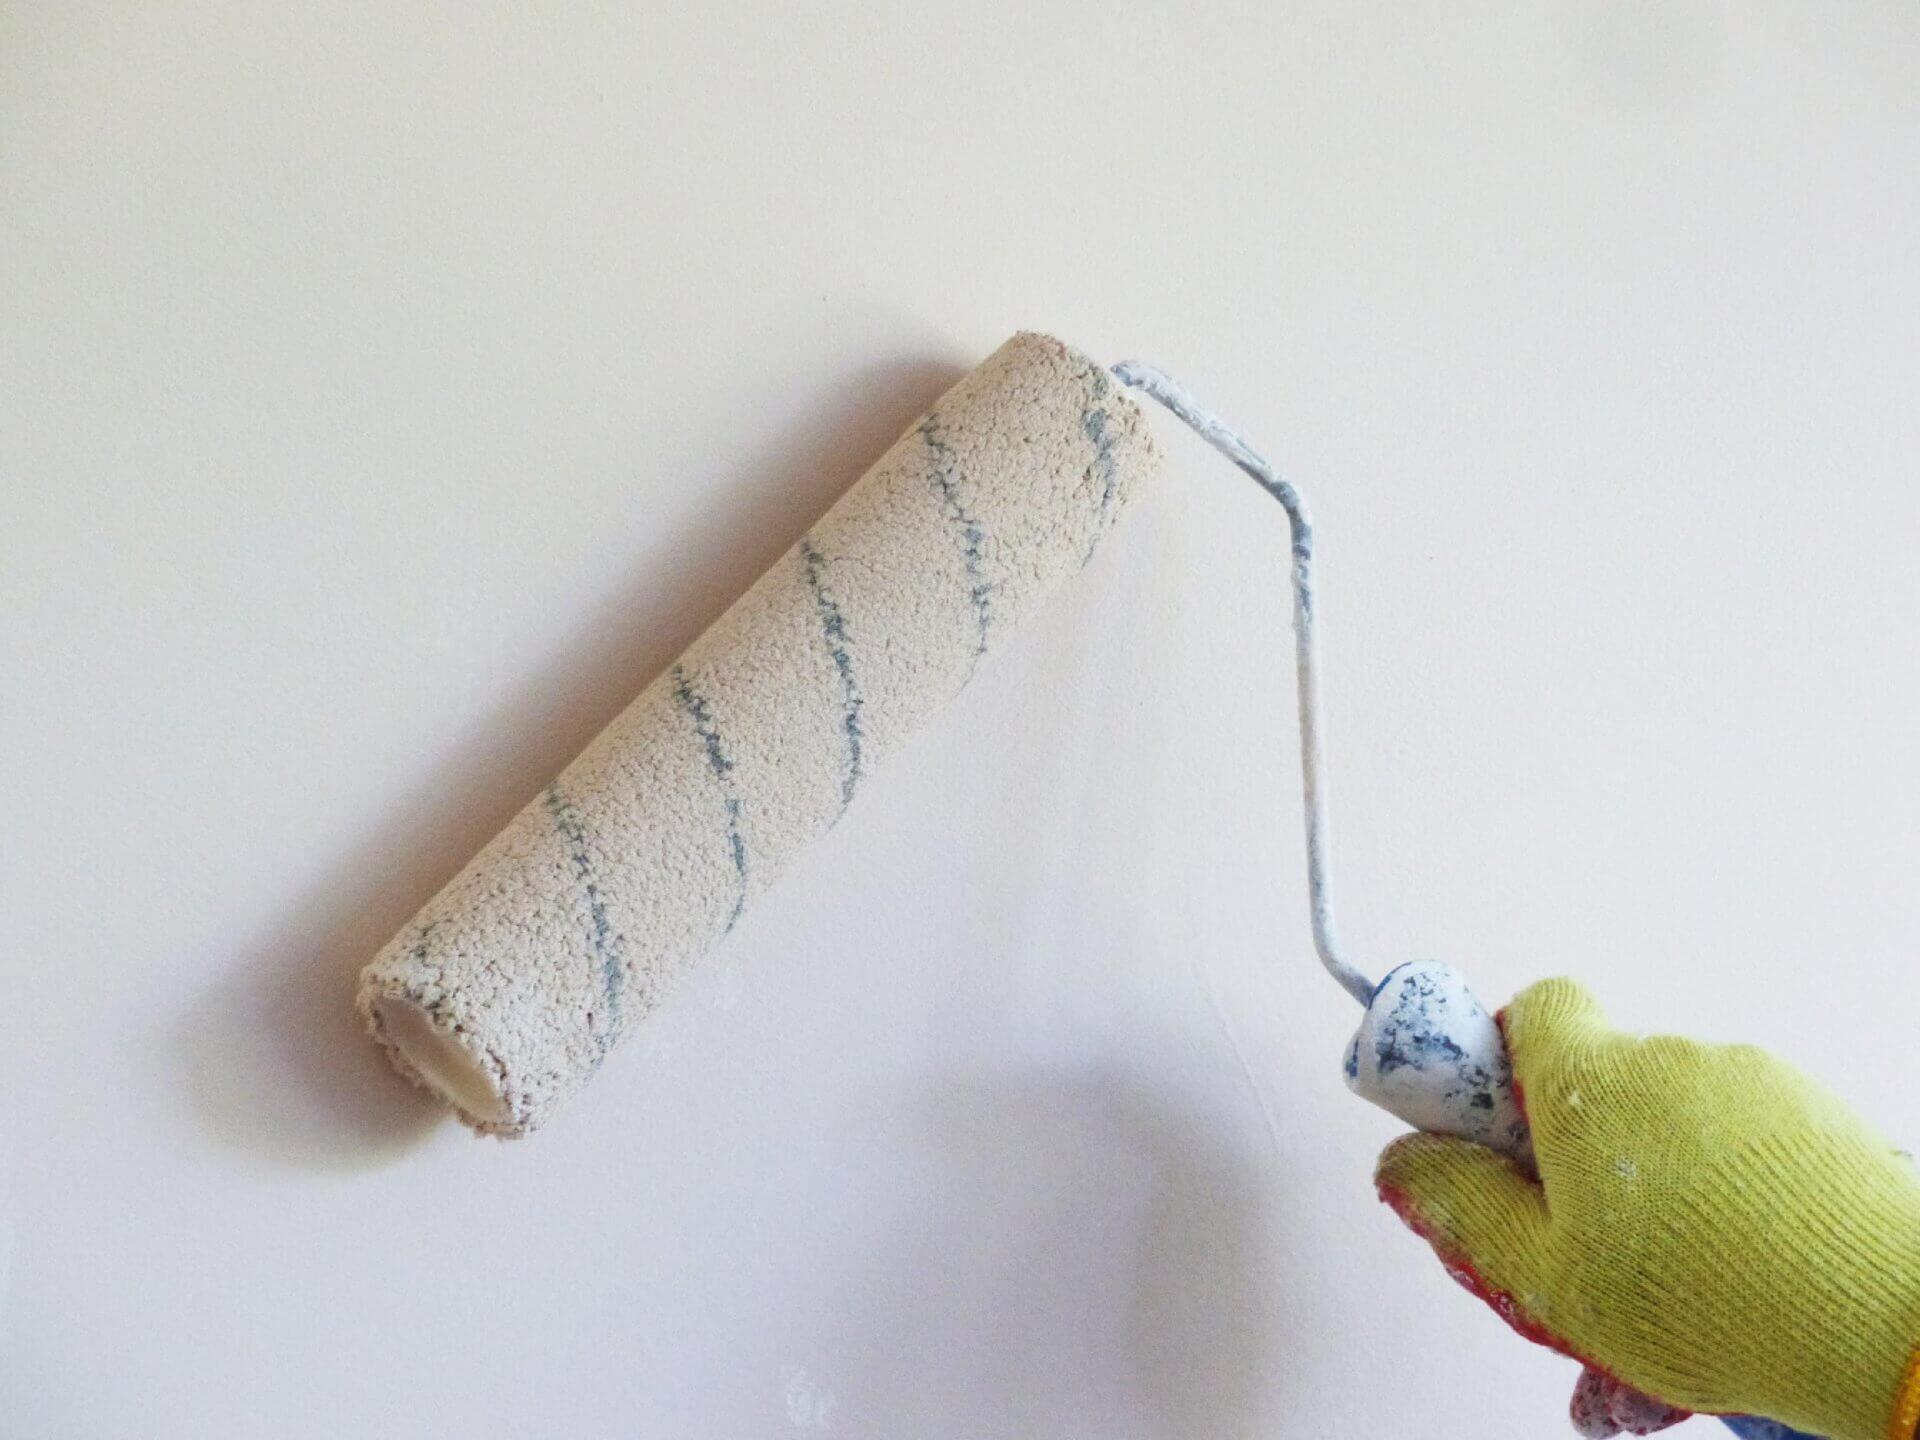 Rolling paint onto a wall